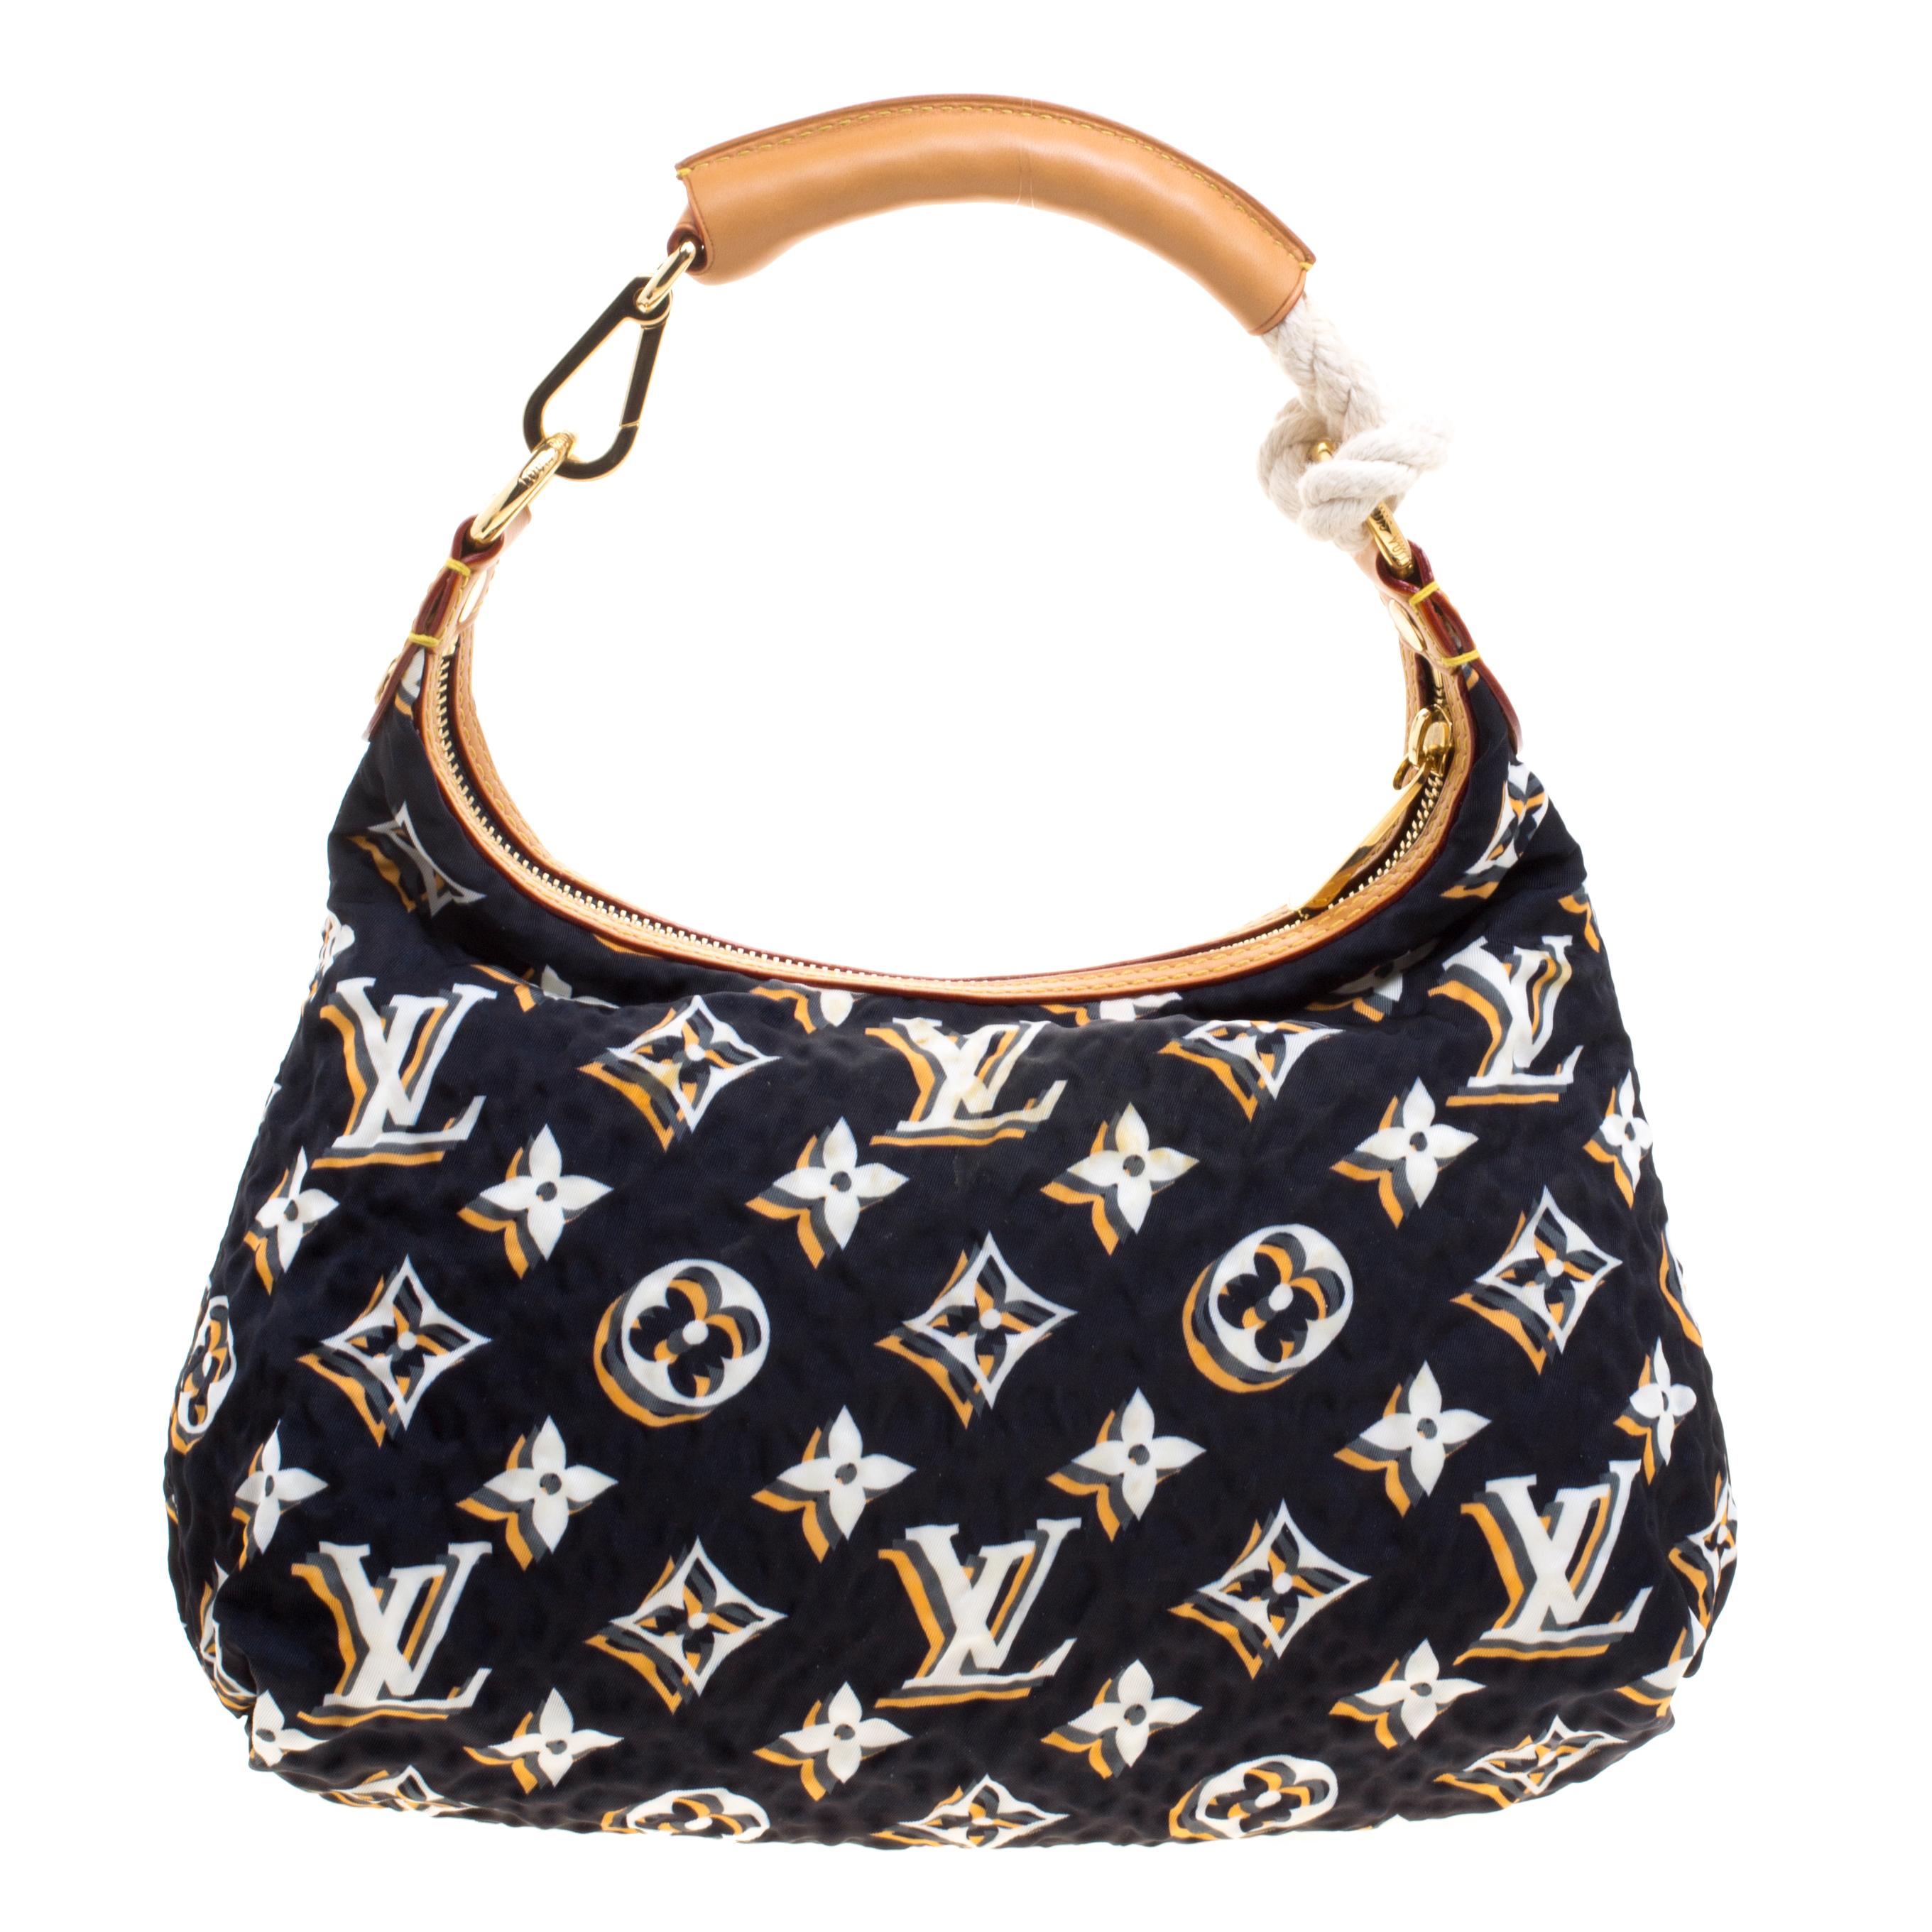 Part of the Limited Edition, this Louis Vuitton bag features a blue monogram fabric body with leather accents. It comes with a rolled top handle and secured with a top zipper closure. Accented with gold-tone hardware, this bag is perfectly